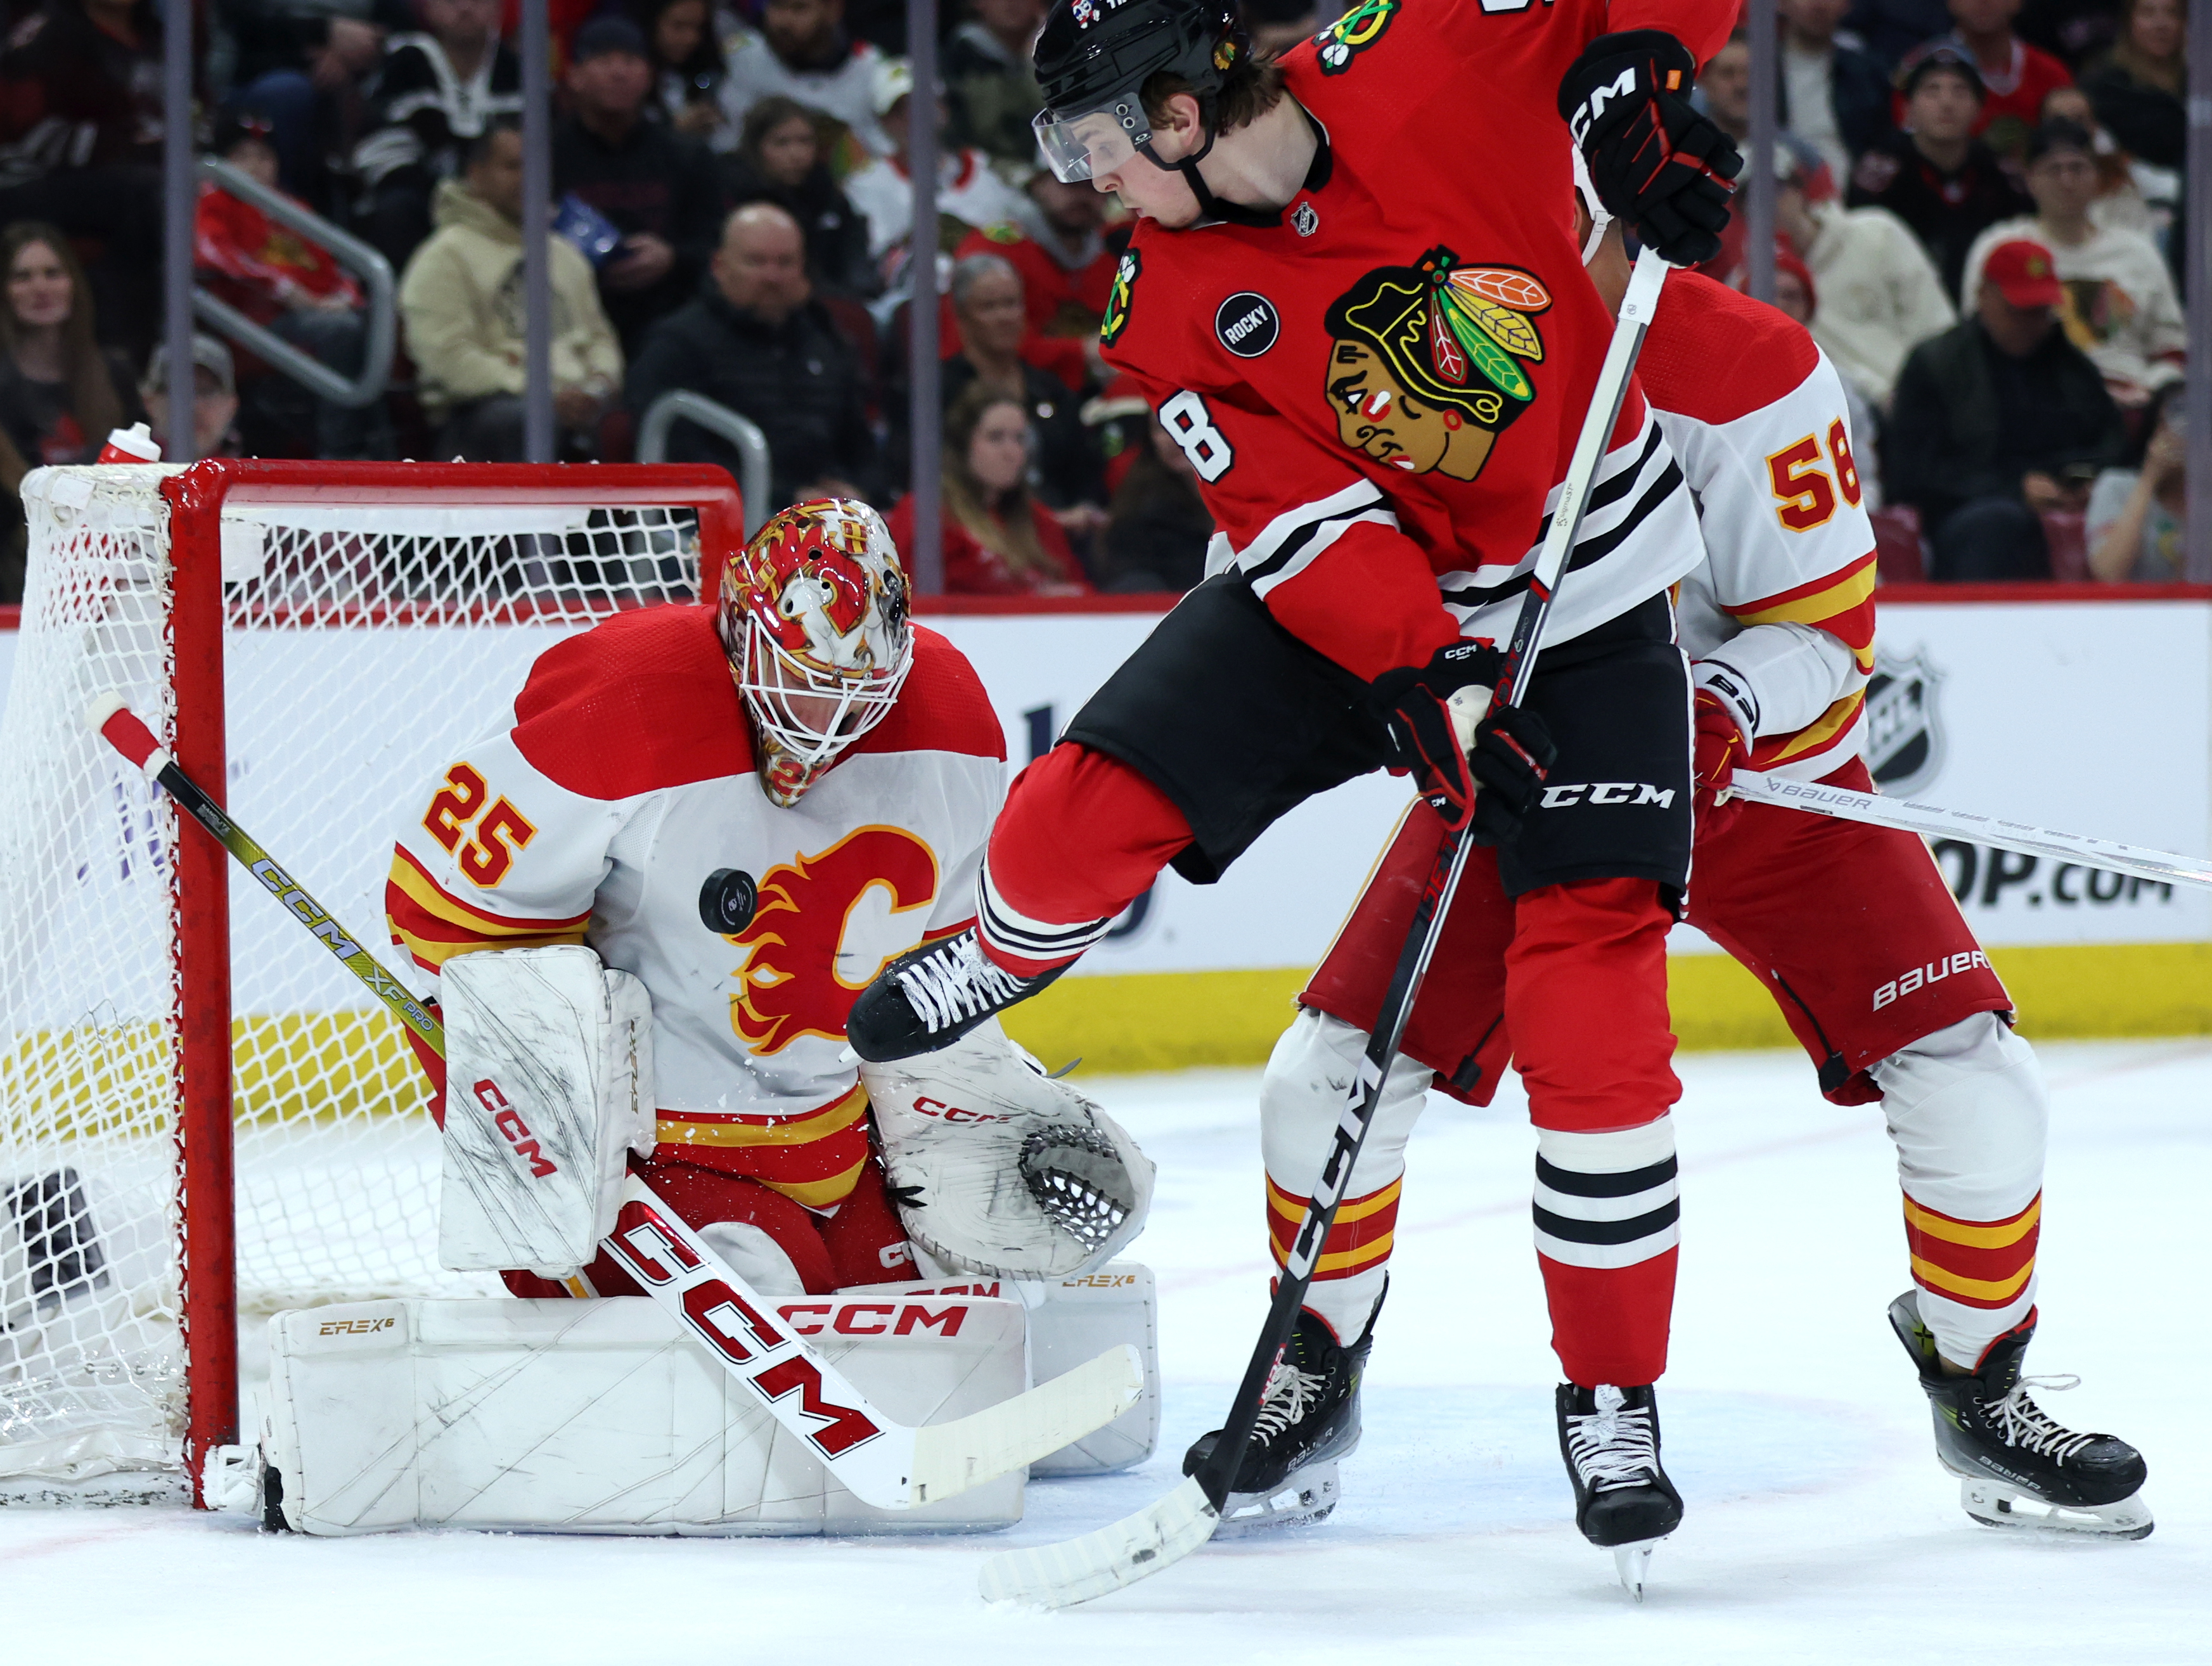 Calgary Flames goaltender Jacob Markstrom (25) blocks a shot as Chicago Blackhawks right wing MacKenzie Entwistle (58) tires to score in the first period of a game at the United Center in Chicago on March 26, 2024. (Chris Sweda/Chicago Tribune)